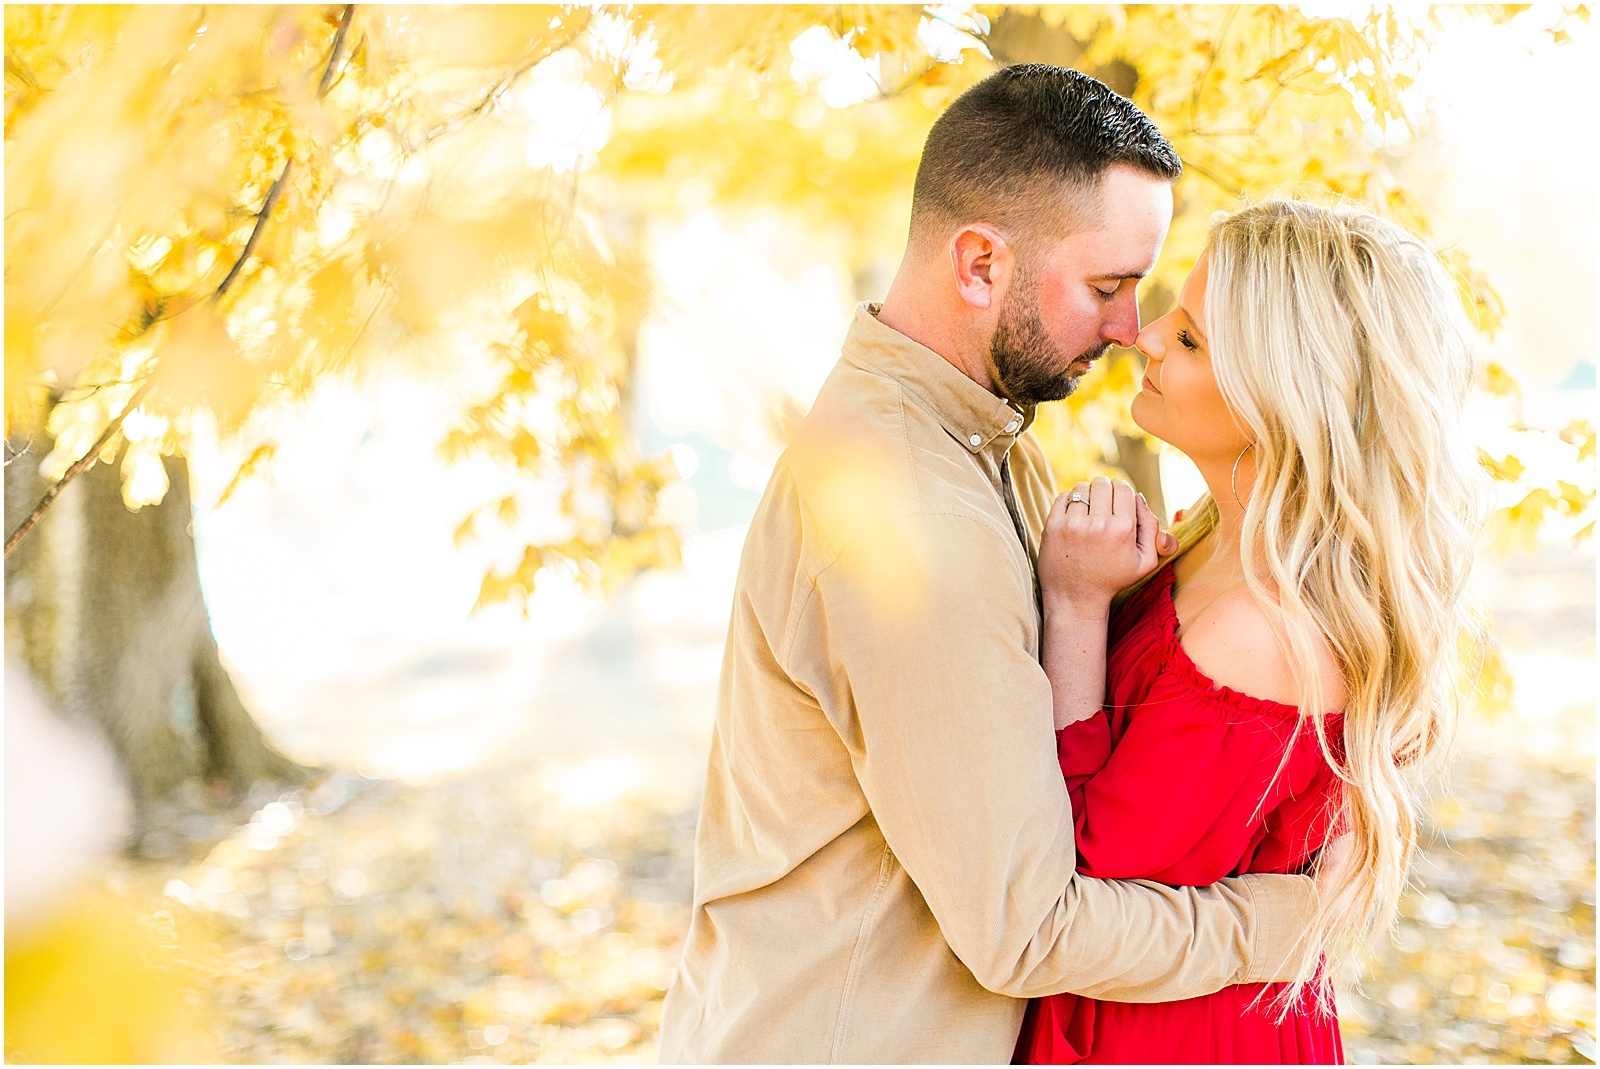 A Southern Indiana Engagement Session | Charleston and Erin | Bret and Brandie Photography029.jpg